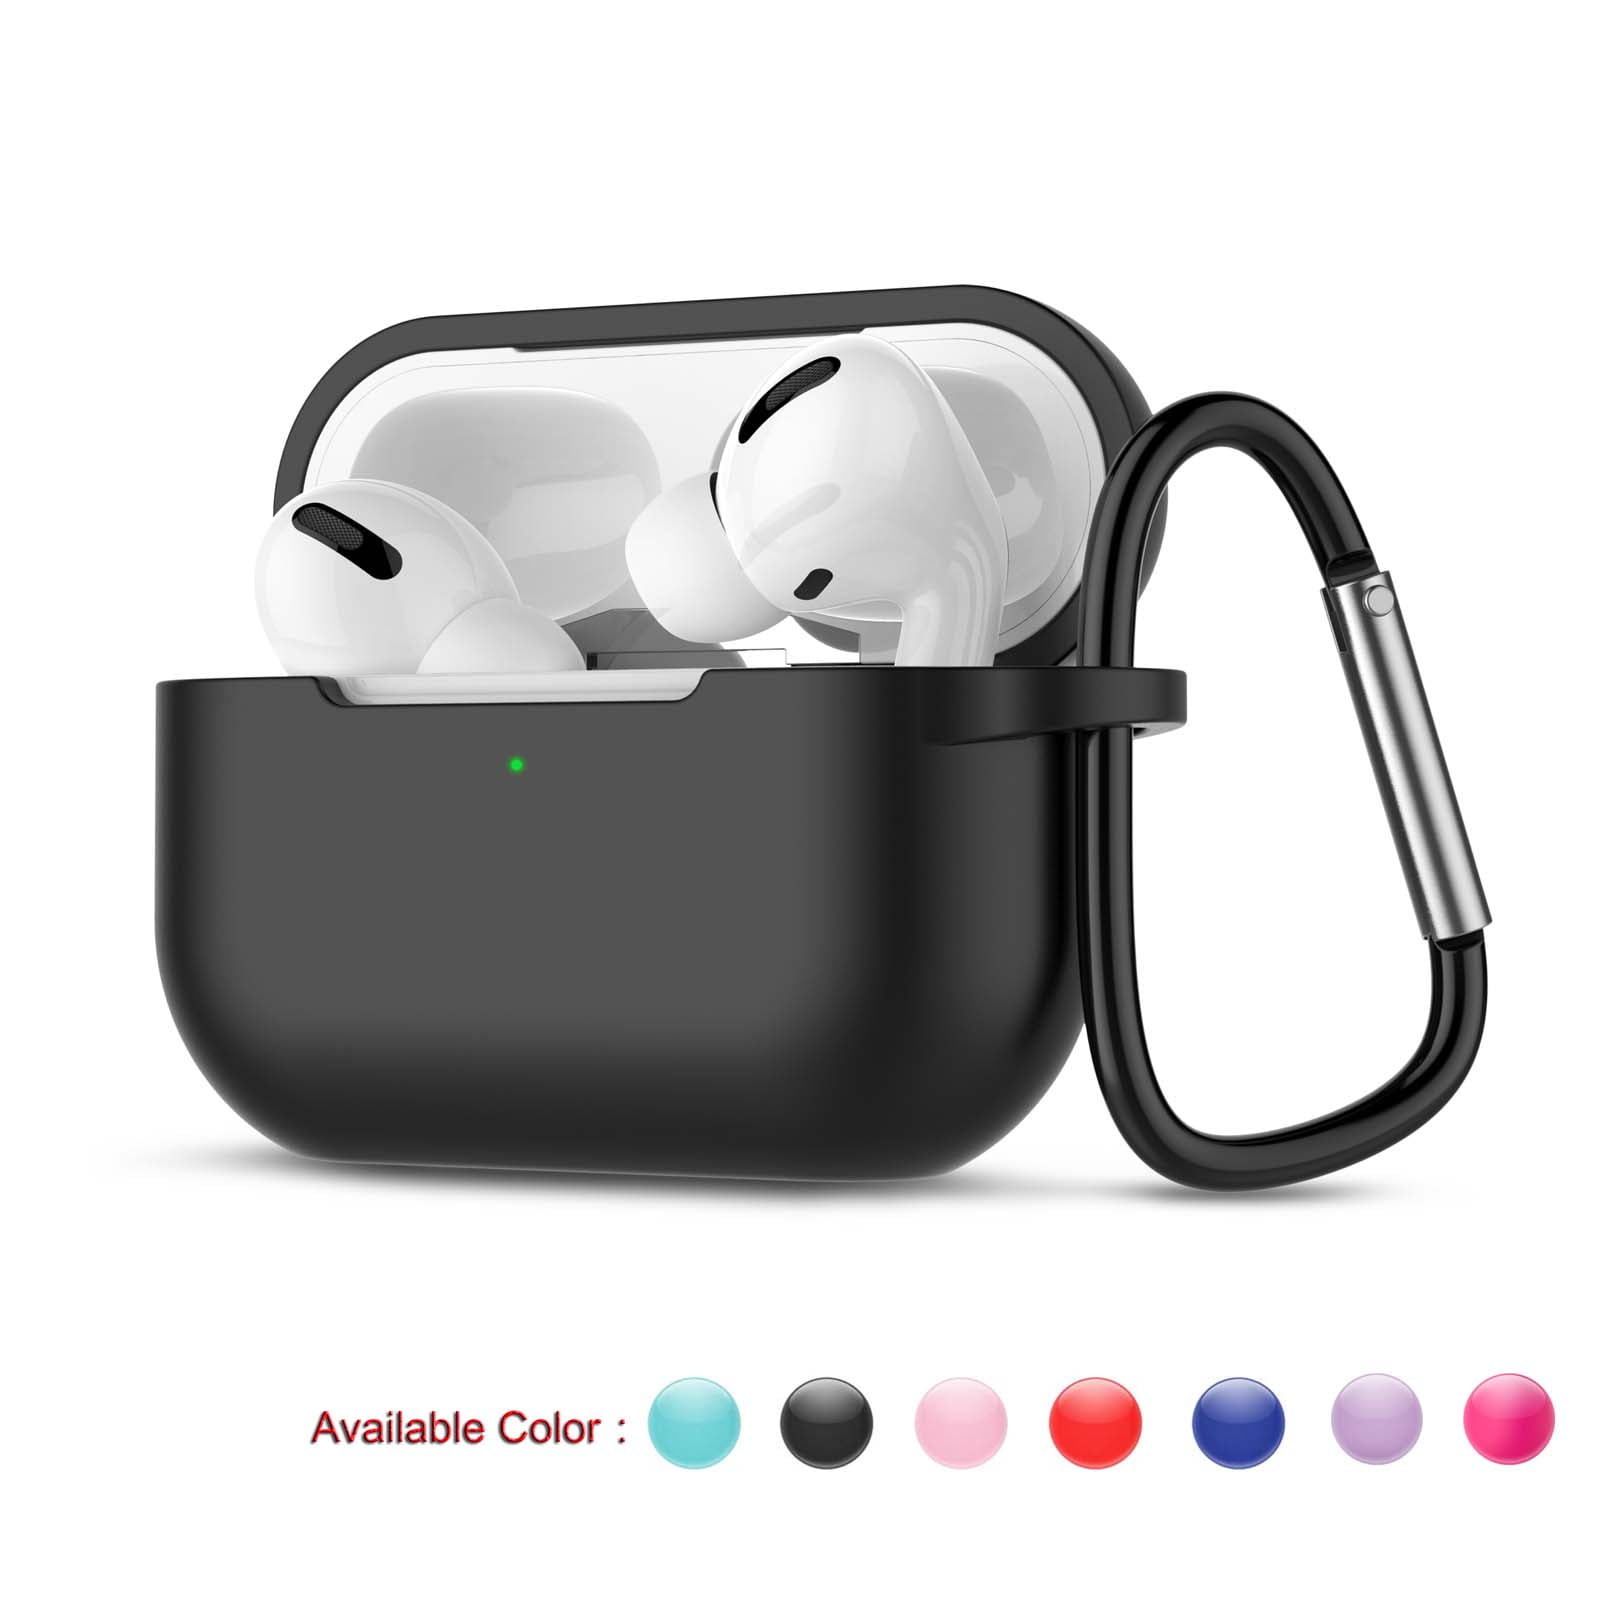 Space Gray Front LED Visible Compatible with AirPods Pro Case Cover Silicone Protective Case Skin for Airpods Pro 2019 